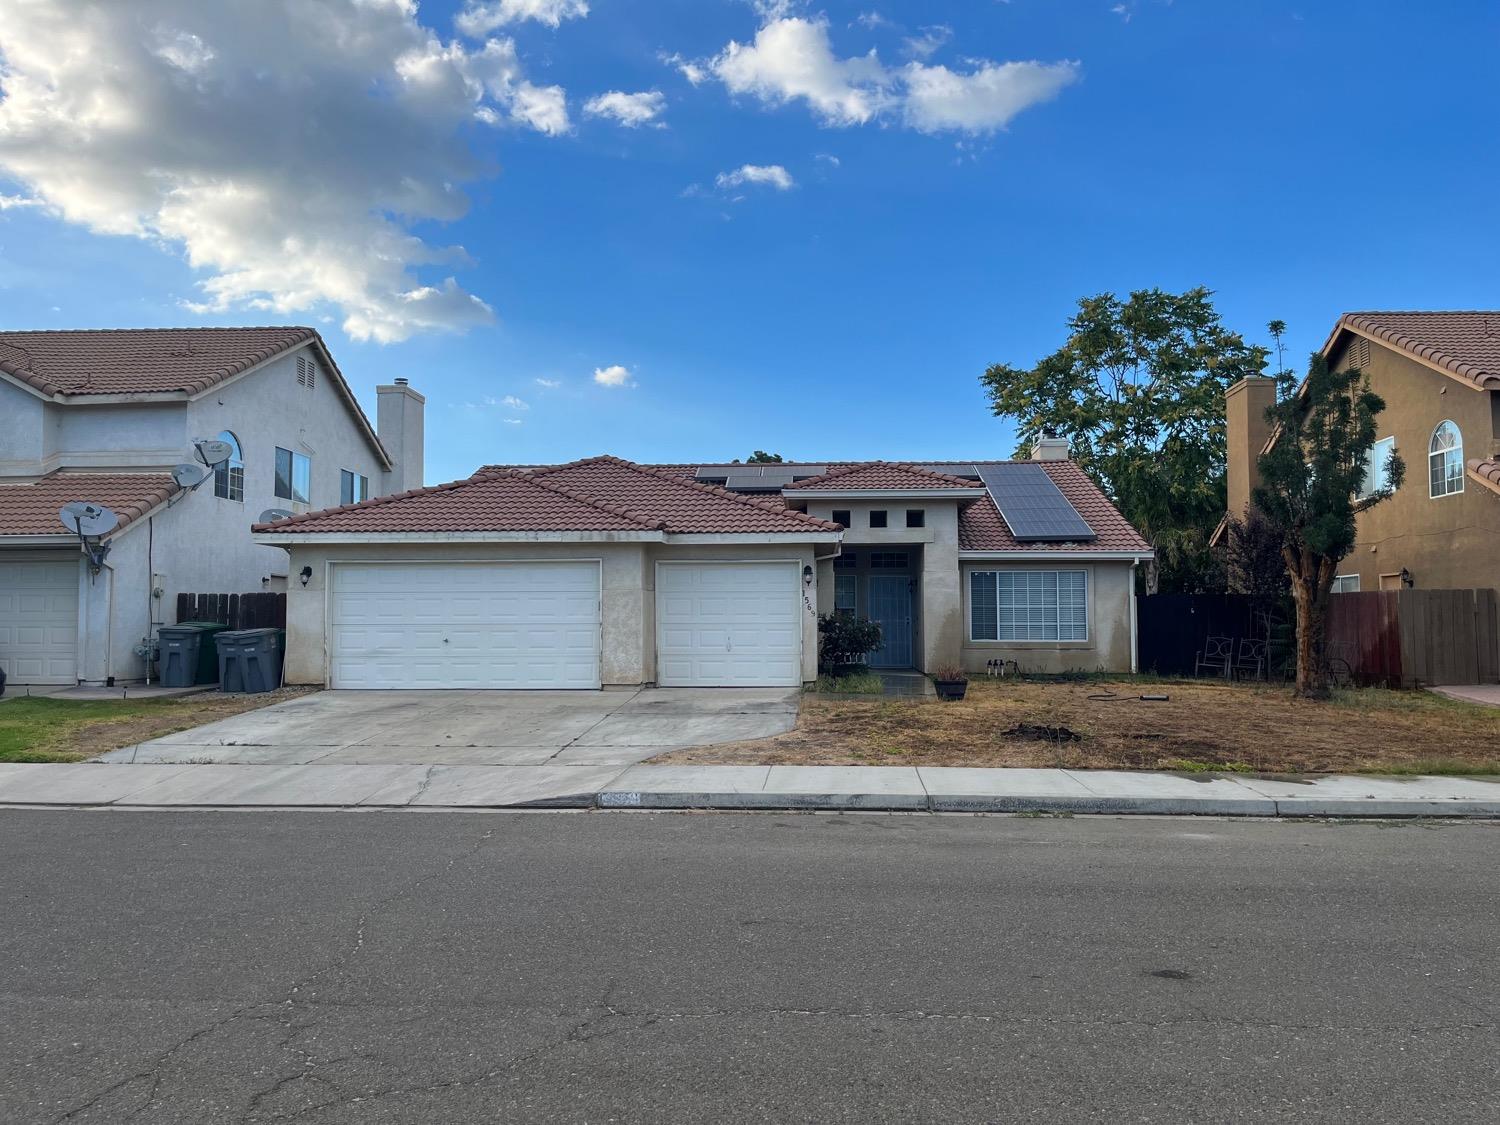 Welcome to 1569 Via Compania in Gustine CA! Situated in the Borrelli Ranch community, this single-st